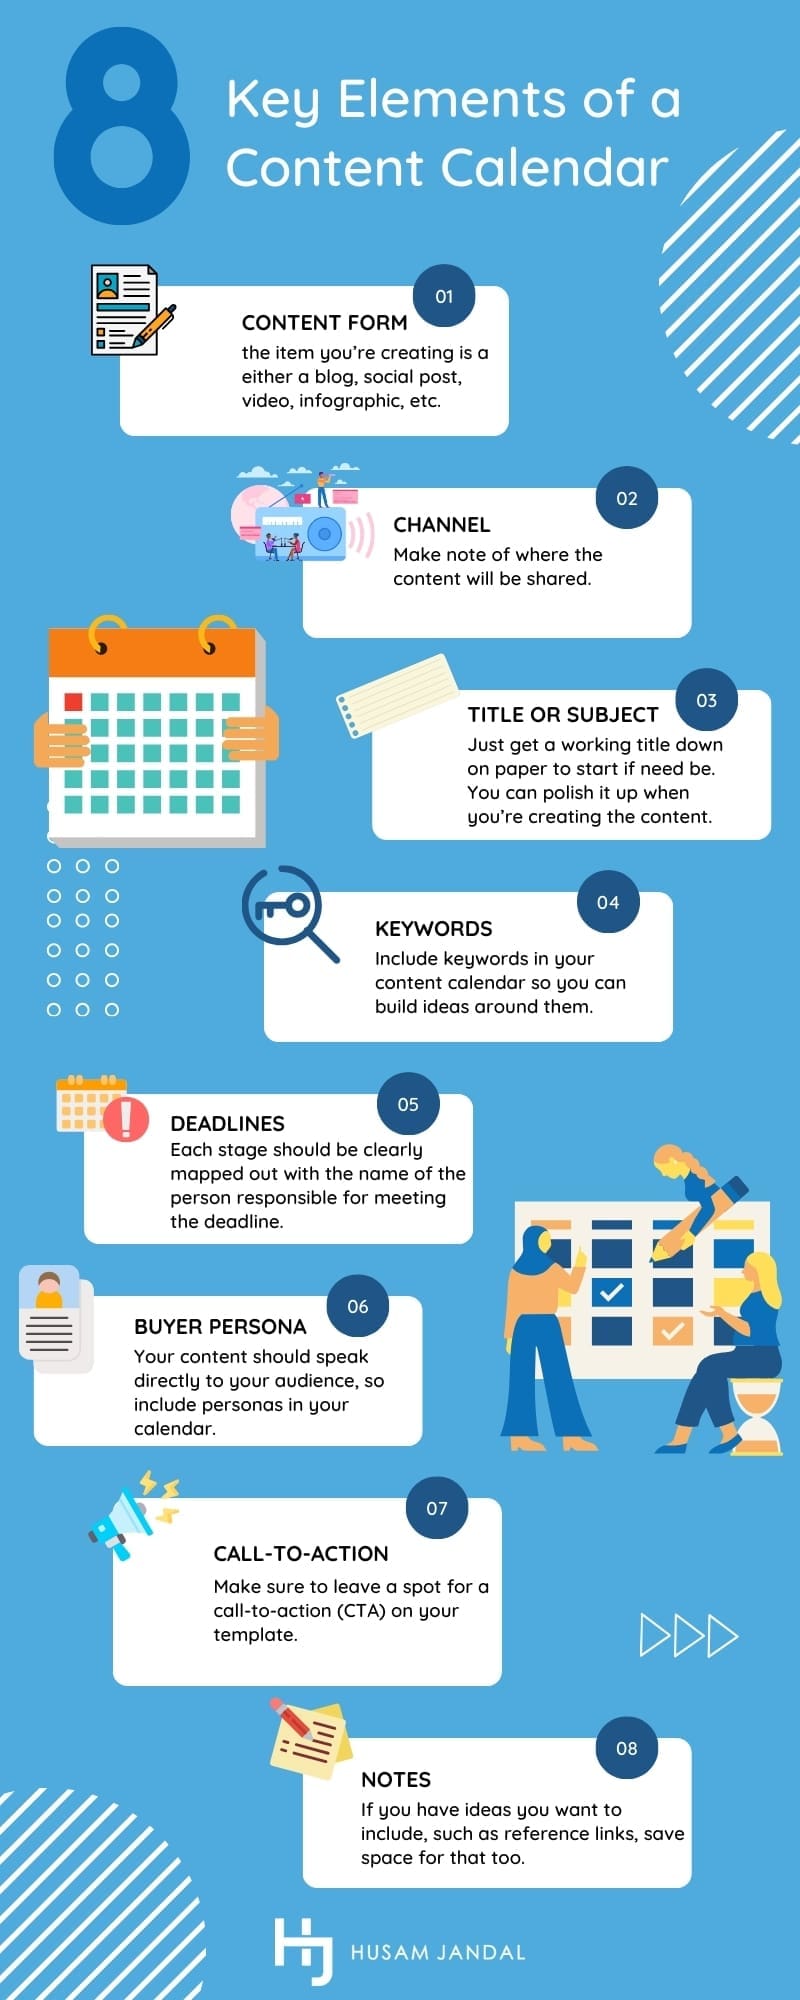 Content Marketing Calendar: What it is and Why You Need One Infographic